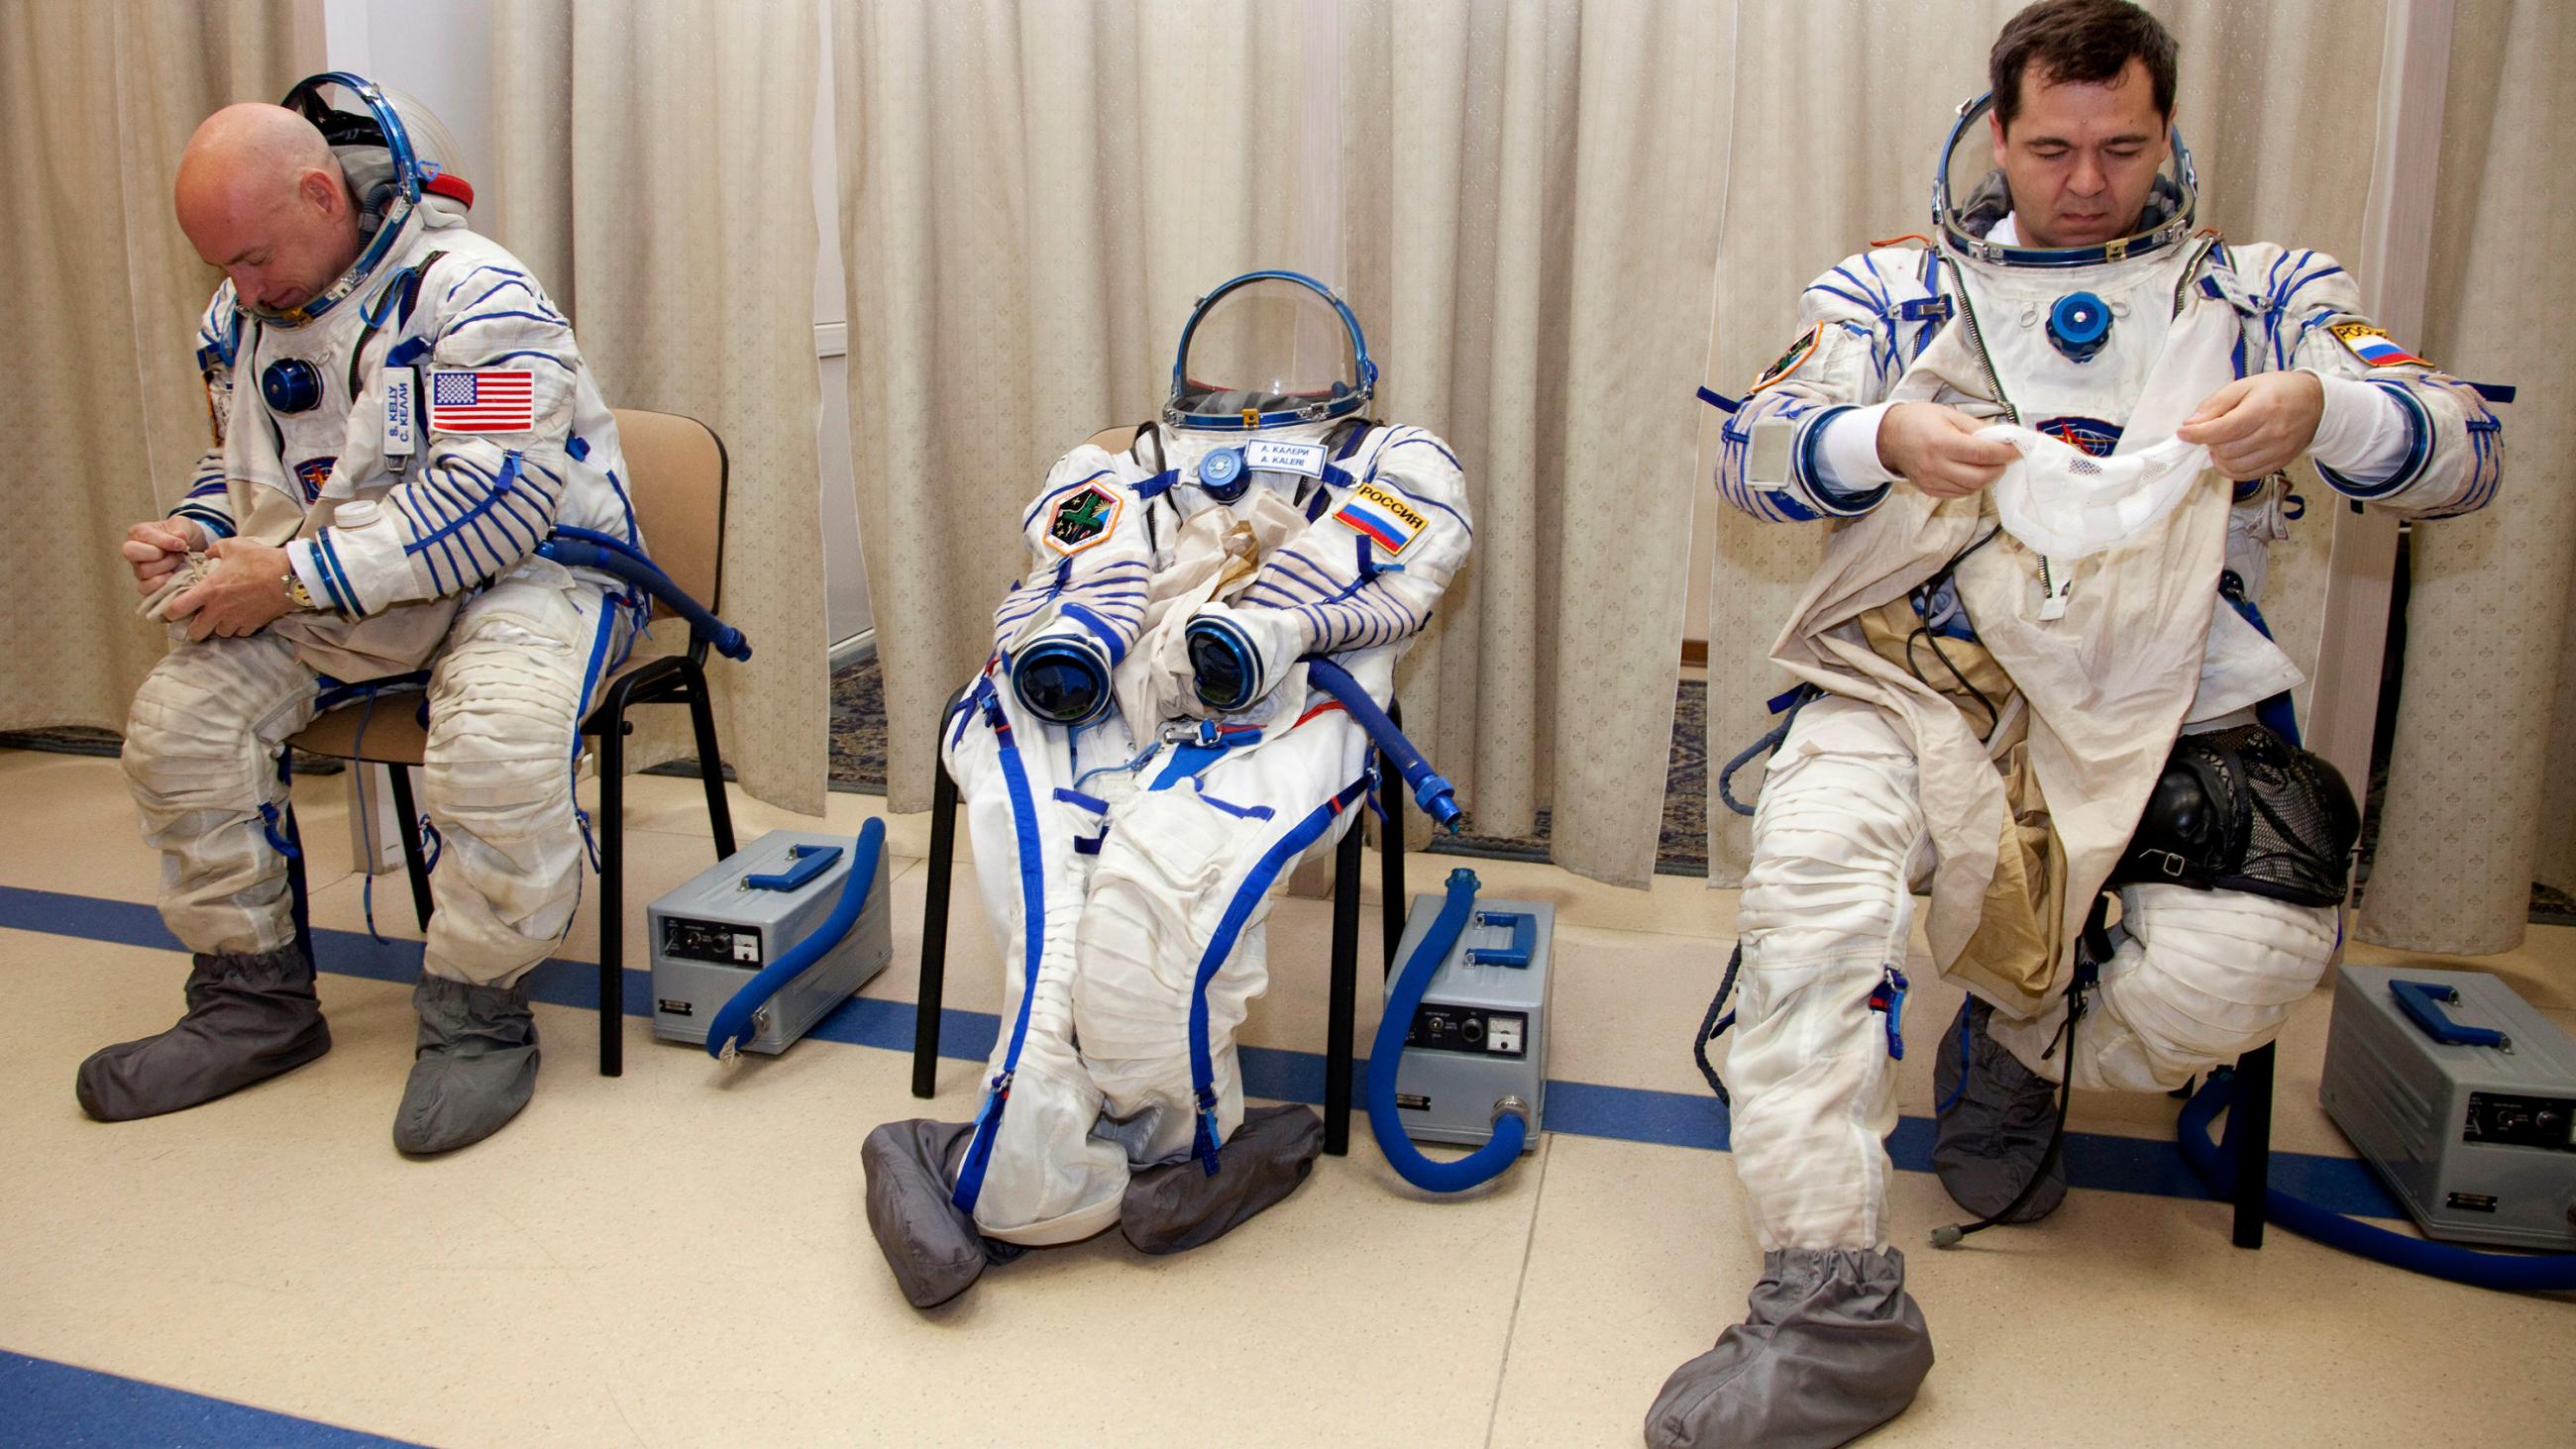  The photo shows the two space travelers donning their classic full-body space suits. In between them is a third suit that lies empty. 